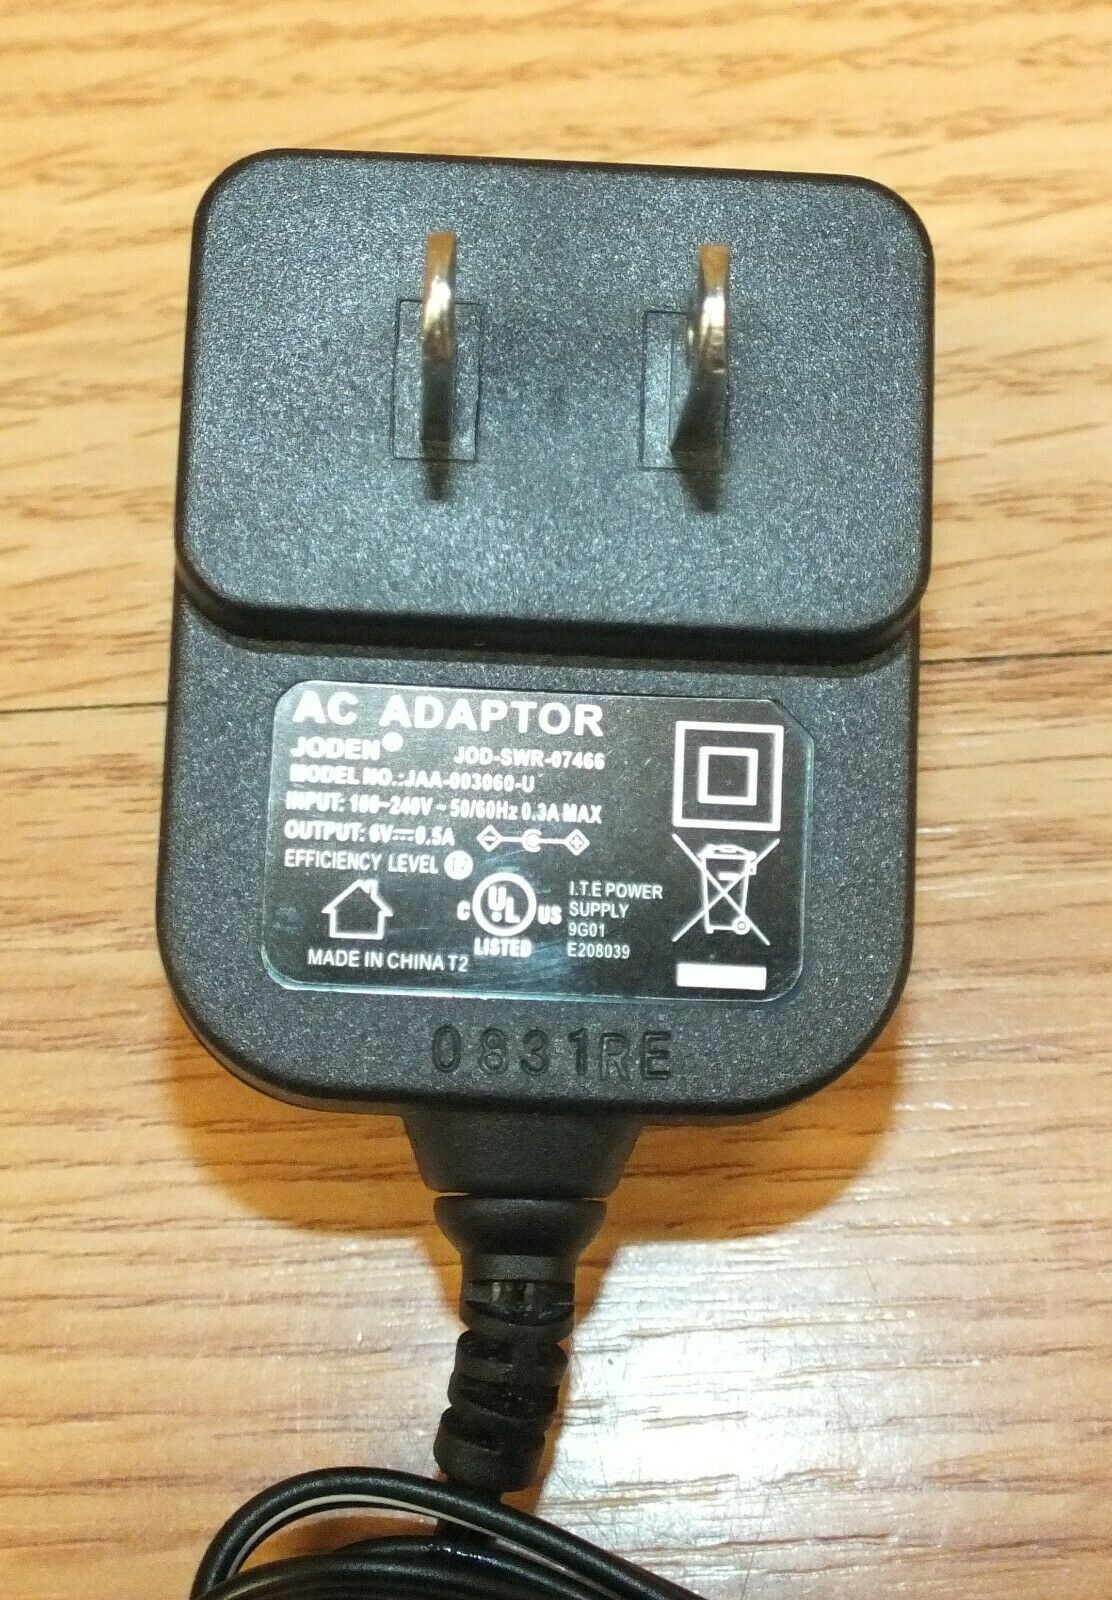 Joden (JOD-SWR-07466) JAA-003060-U 6V 0.5A I.T.E. Power Supply Type: AC/DC Adapter Features: Powered MPN: JAA-00306